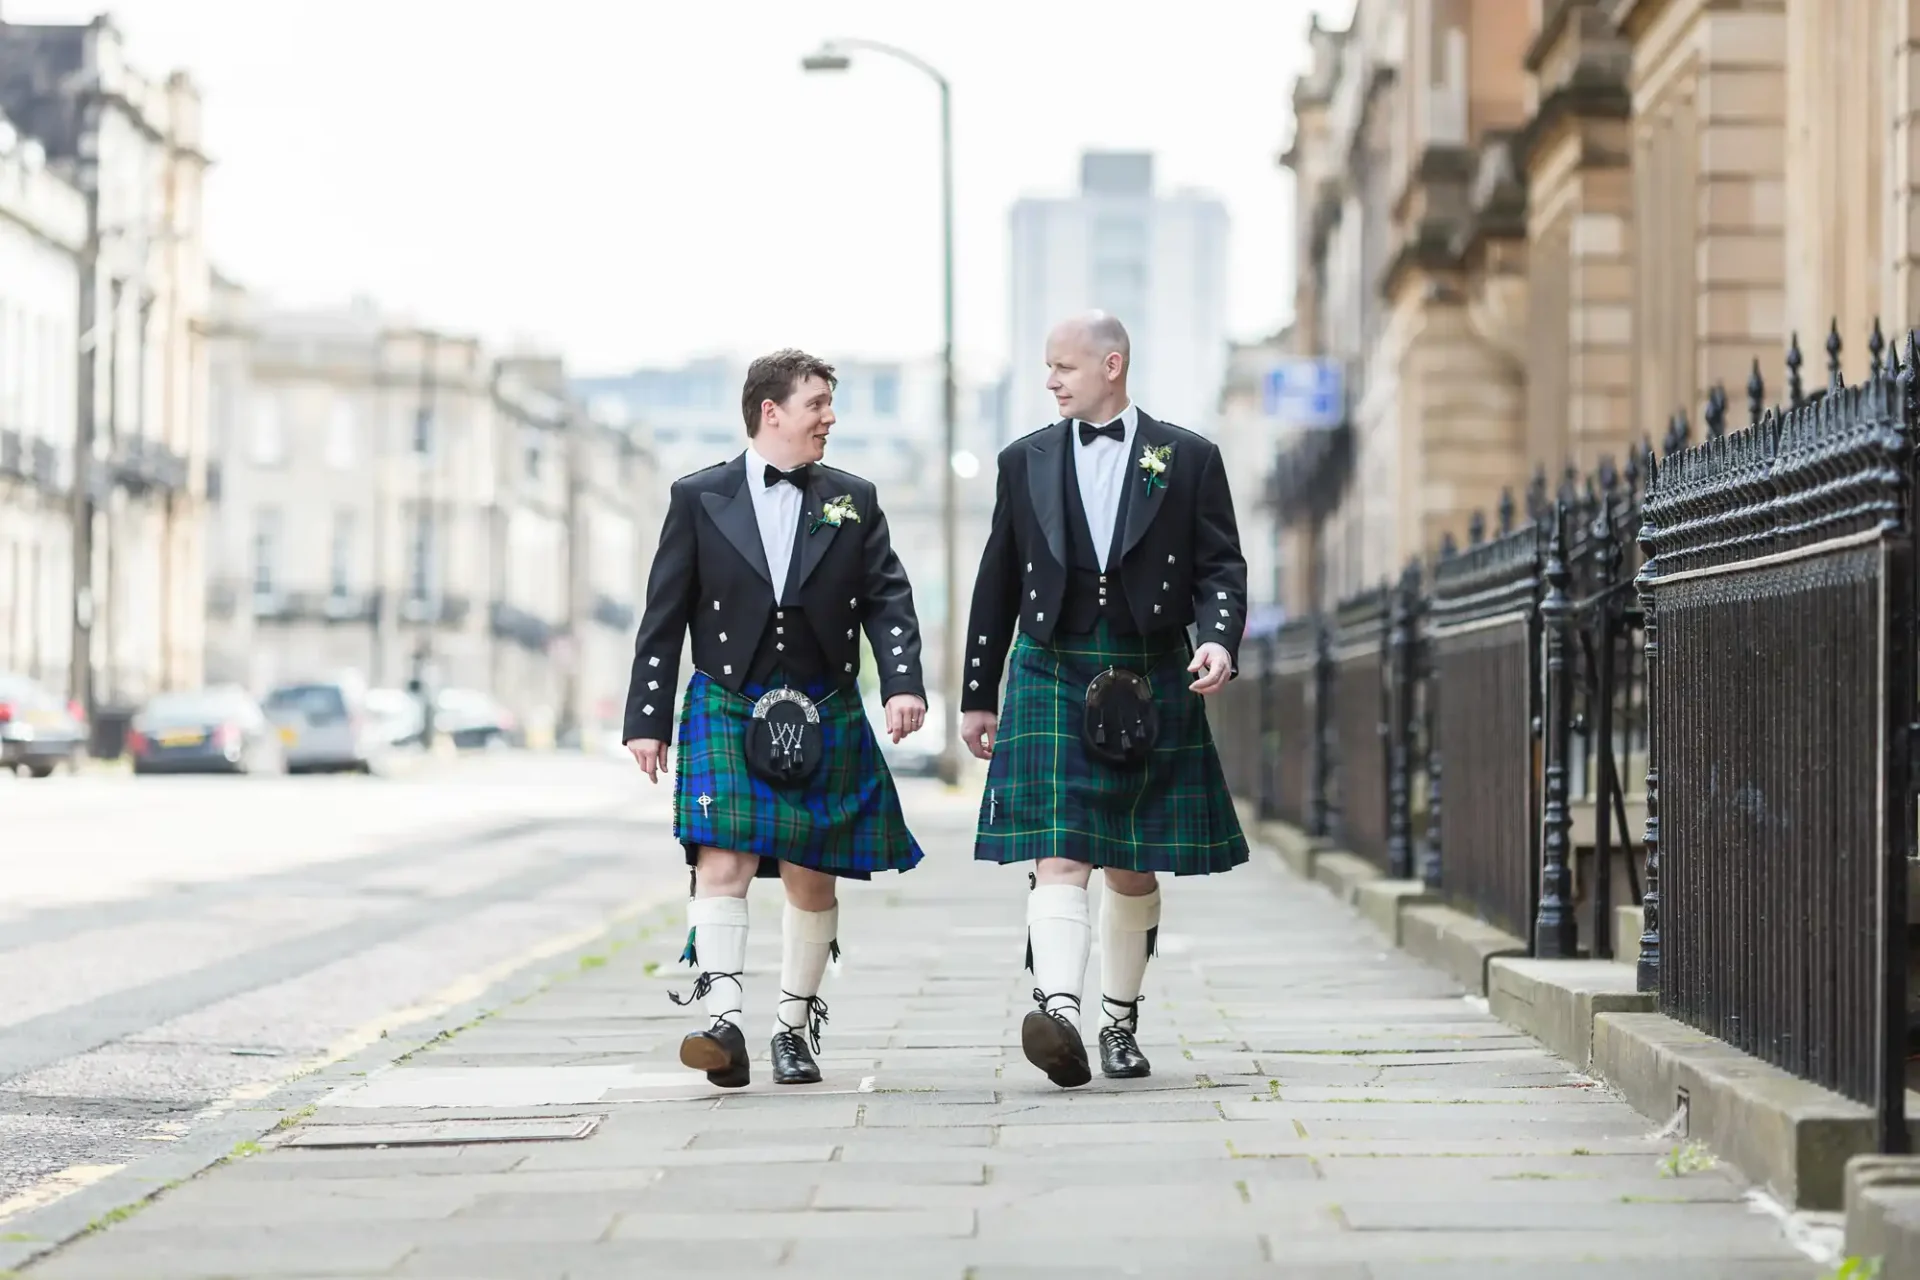 Two men in formal kilts and jackets walking on a city street, smiling and conversing.